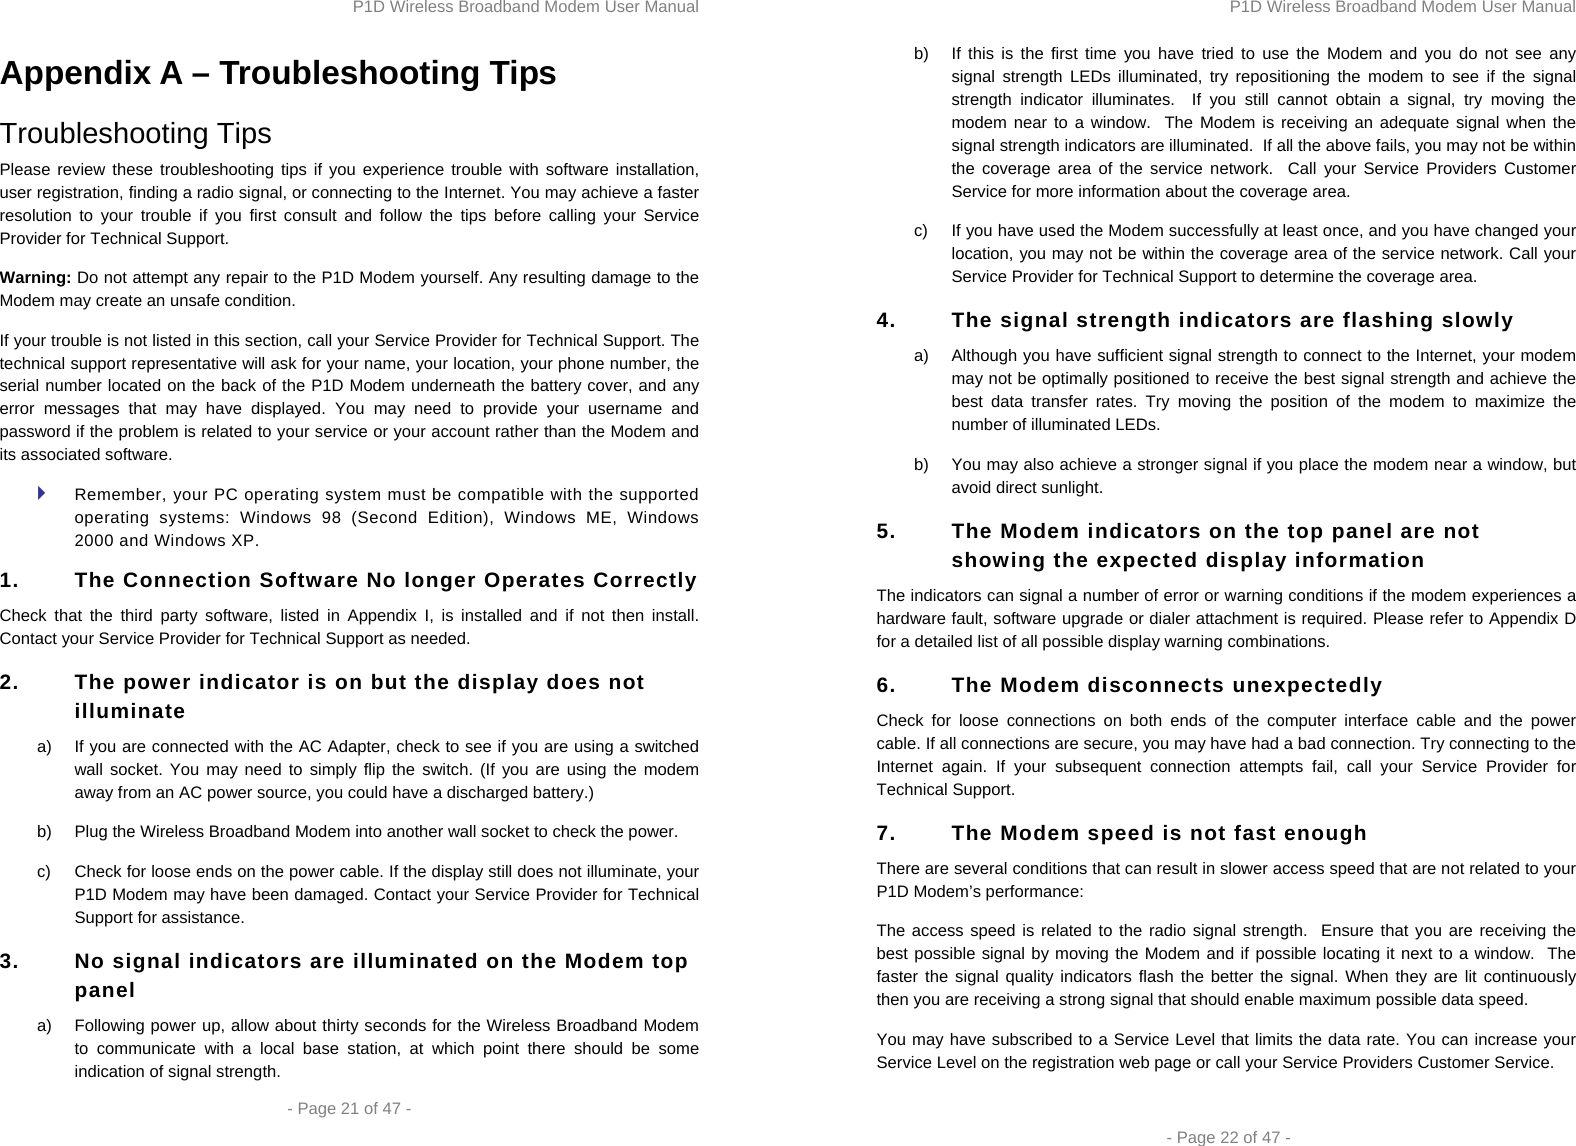 P1D Wireless Broadband Modem User Manual  - Page 21 of 47 -  Appendix A – Troubleshooting Tips Troubleshooting Tips Please review these troubleshooting tips if you experience trouble with software installation, user registration, finding a radio signal, or connecting to the Internet. You may achieve a faster resolution to your trouble if you first consult and follow the tips before calling your Service Provider for Technical Support.  Warning: Do not attempt any repair to the P1D Modem yourself. Any resulting damage to the Modem may create an unsafe condition.  If your trouble is not listed in this section, call your Service Provider for Technical Support. The technical support representative will ask for your name, your location, your phone number, the serial number located on the back of the P1D Modem underneath the battery cover, and any error messages that may have displayed. You may need to provide your username and password if the problem is related to your service or your account rather than the Modem and its associated software.  Remember, your PC operating system must be compatible with the supported operating systems: Windows 98 (Second Edition), Windows ME, Windows 2000 and Windows XP. 1.  The Connection Software No longer Operates Correctly Check that the third party software, listed in Appendix I, is installed and if not then install. Contact your Service Provider for Technical Support as needed. 2.  The power indicator is on but the display does not illuminate a)  If you are connected with the AC Adapter, check to see if you are using a switched wall socket. You may need to simply flip the switch. (If you are using the modem away from an AC power source, you could have a discharged battery.) b)  Plug the Wireless Broadband Modem into another wall socket to check the power. c)  Check for loose ends on the power cable. If the display still does not illuminate, your P1D Modem may have been damaged. Contact your Service Provider for Technical Support for assistance.  3.  No signal indicators are illuminated on the Modem top panel a)  Following power up, allow about thirty seconds for the Wireless Broadband Modem to communicate with a local base station, at which point there should be some indication of signal strength. P1D Wireless Broadband Modem User Manual  - Page 22 of 47 - b)  If this is the first time you have tried to use the Modem and you do not see any signal strength LEDs illuminated, try repositioning the modem to see if the signal strength indicator illuminates.  If you still cannot obtain a signal, try moving the modem near to a window.  The Modem is receiving an adequate signal when the signal strength indicators are illuminated.  If all the above fails, you may not be within the coverage area of the service network.  Call your Service Providers Customer Service for more information about the coverage area. c)  If you have used the Modem successfully at least once, and you have changed your location, you may not be within the coverage area of the service network. Call your Service Provider for Technical Support to determine the coverage area. 4.  The signal strength indicators are flashing slowly a)  Although you have sufficient signal strength to connect to the Internet, your modem may not be optimally positioned to receive the best signal strength and achieve the best data transfer rates. Try moving the position of the modem to maximize the number of illuminated LEDs.  b)  You may also achieve a stronger signal if you place the modem near a window, but avoid direct sunlight. 5.  The Modem indicators on the top panel are not showing the expected display information The indicators can signal a number of error or warning conditions if the modem experiences a hardware fault, software upgrade or dialer attachment is required. Please refer to Appendix D for a detailed list of all possible display warning combinations. 6.  The Modem disconnects unexpectedly Check for loose connections on both ends of the computer interface cable and the power cable. If all connections are secure, you may have had a bad connection. Try connecting to the Internet again. If your subsequent connection attempts fail, call your Service Provider for Technical Support. 7.  The Modem speed is not fast enough There are several conditions that can result in slower access speed that are not related to your P1D Modem’s performance: The access speed is related to the radio signal strength.  Ensure that you are receiving the best possible signal by moving the Modem and if possible locating it next to a window.  The faster the signal quality indicators flash the better the signal. When they are lit continuously then you are receiving a strong signal that should enable maximum possible data speed. You may have subscribed to a Service Level that limits the data rate. You can increase your Service Level on the registration web page or call your Service Providers Customer Service. 